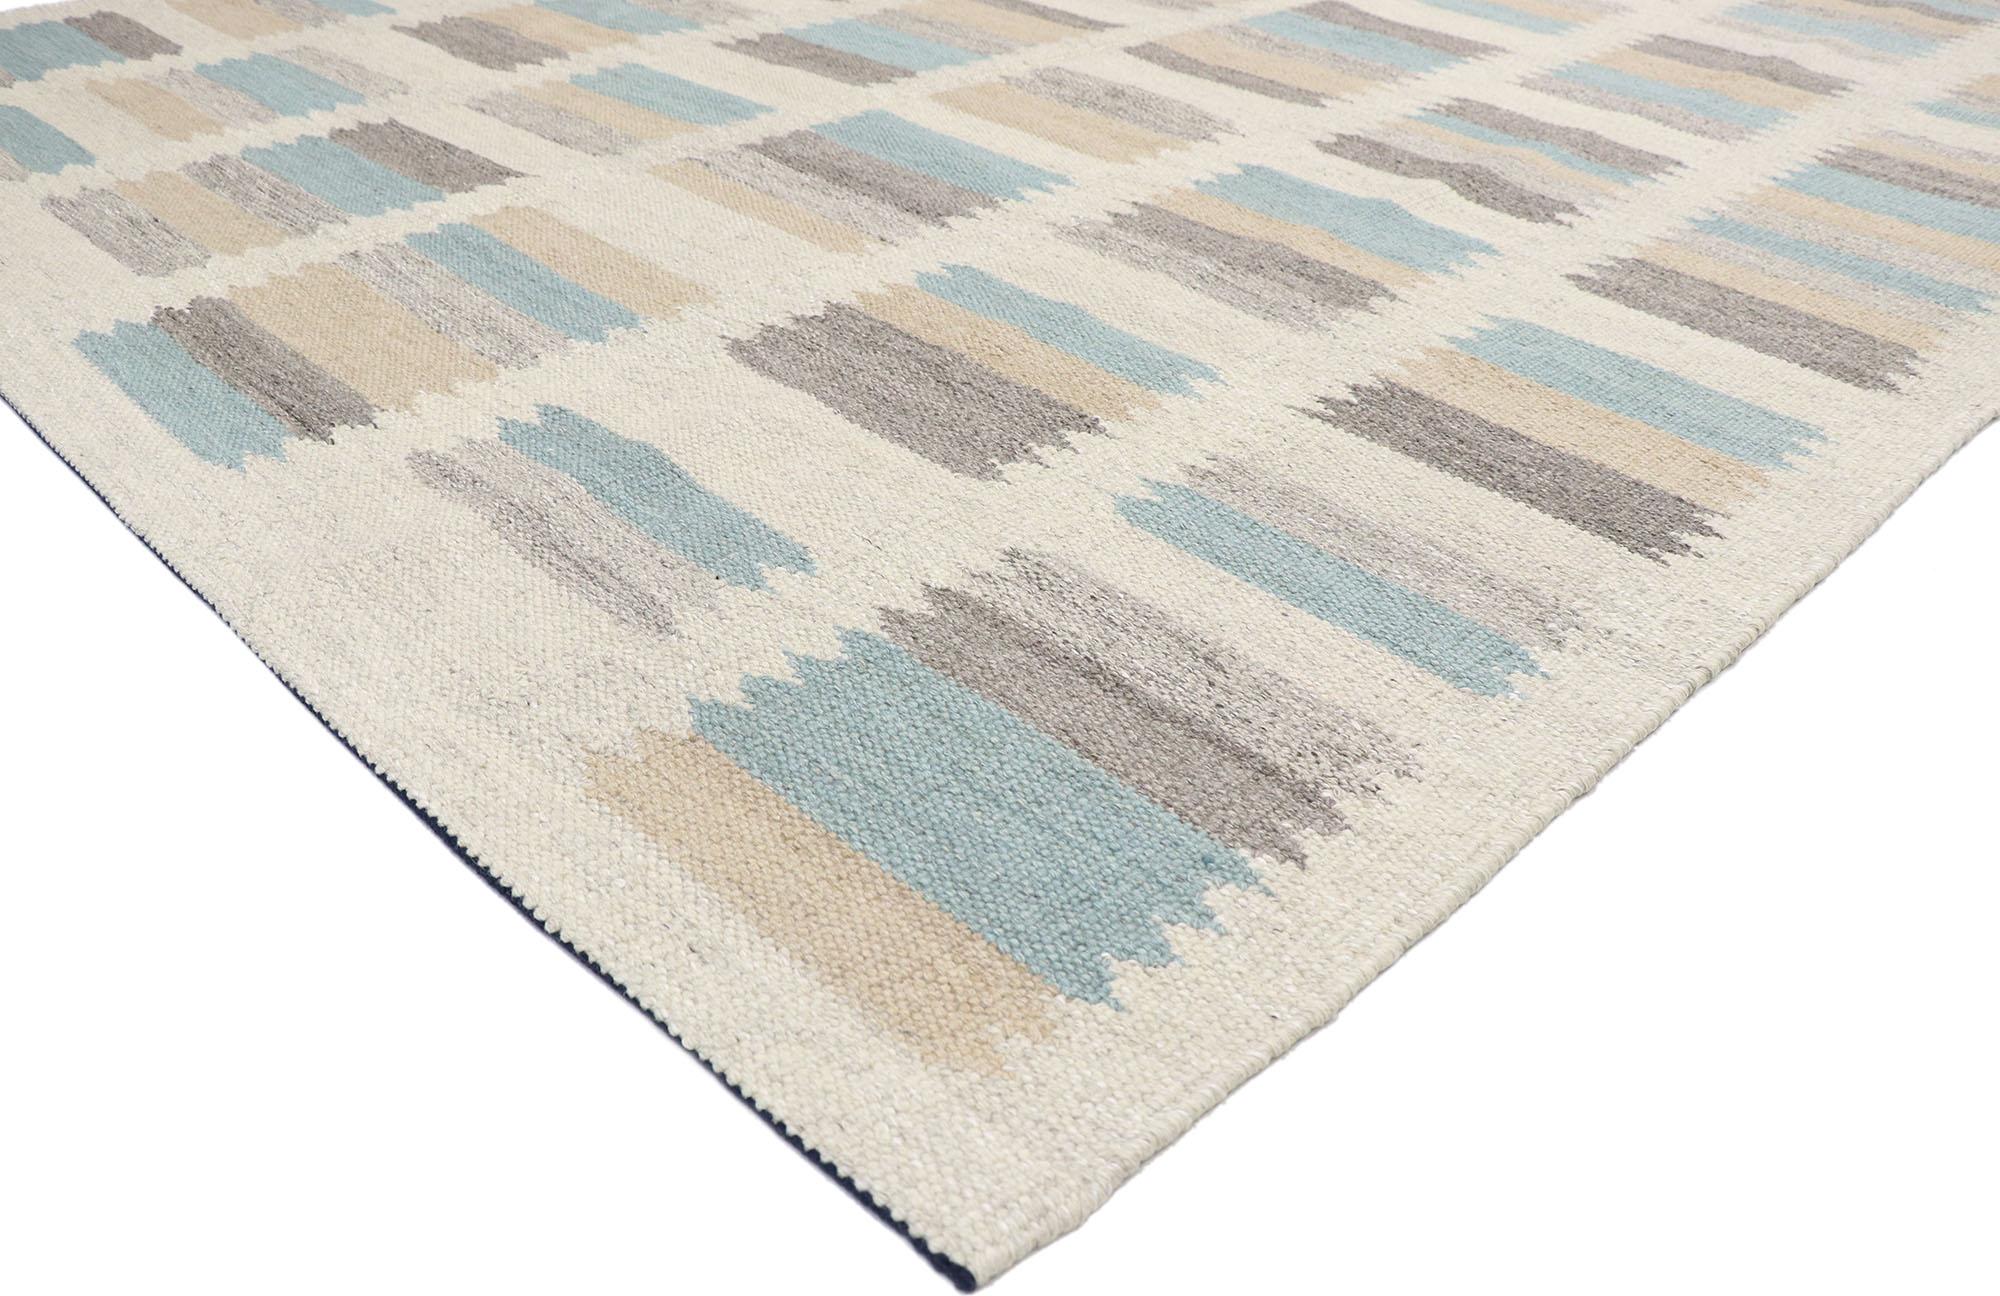 30637 New Contemporary Swedish Inspired Kilim Rug with Scandinavian Modern Style 09'03 x 11'07. With its geometric design and bohemian hygge vibes, this hand-woven wool Swedish Indian Kilim rug beautifully embodies the simplicity of Scandinavian